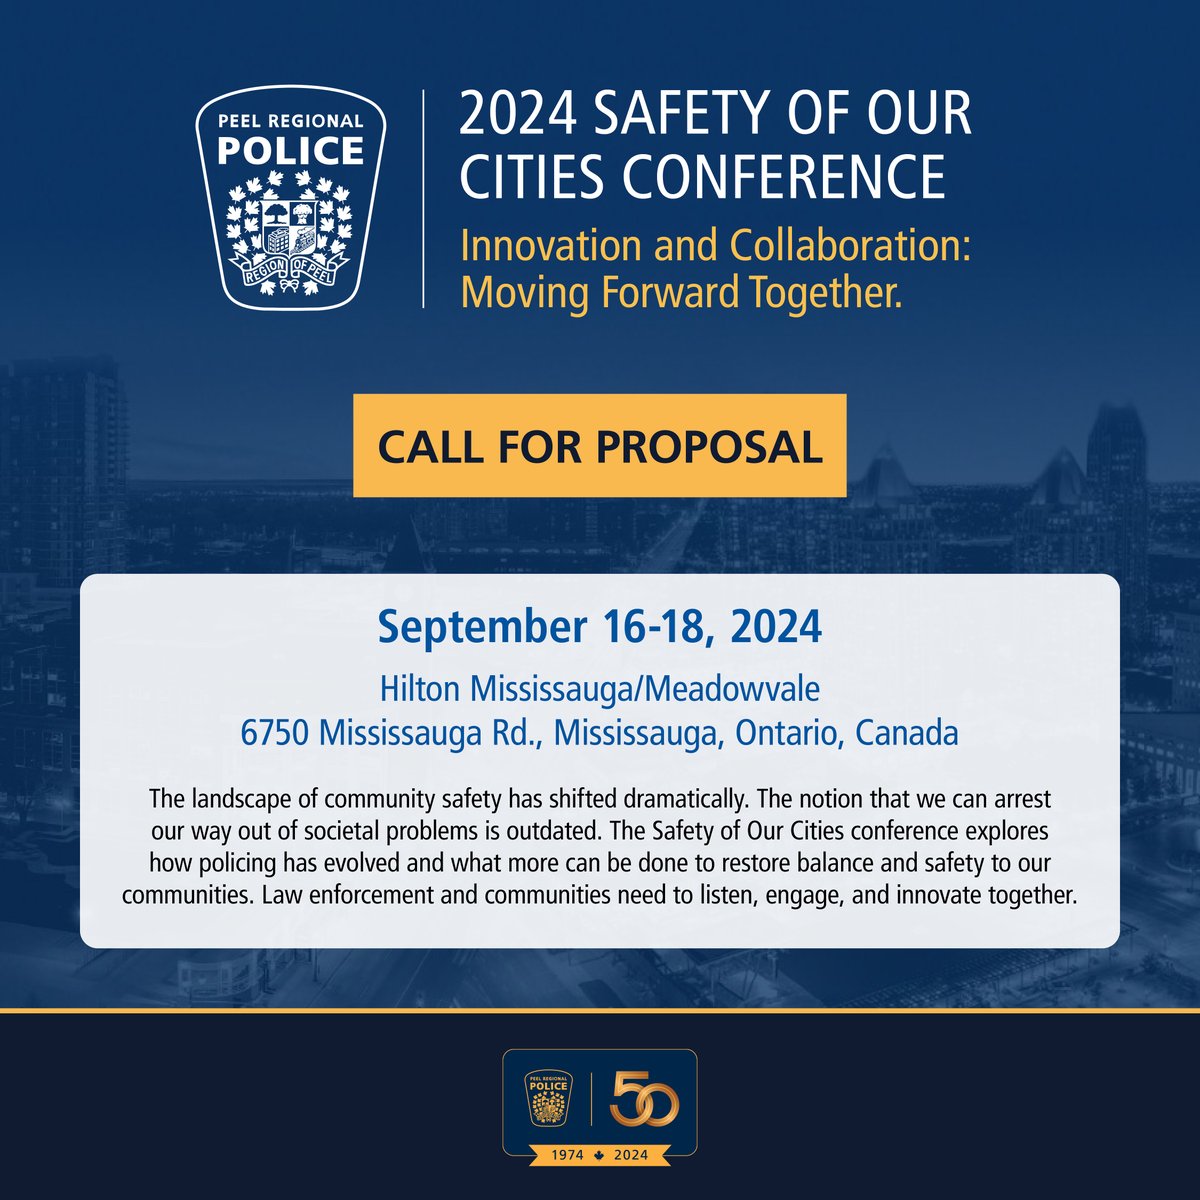 Call for Proposals NOW OPEN for the 2nd Annual Safety of our Cities Conference. Innovation & Collaboration: Moving Forward Together – Sept 16-18, 2024. Submit your proposal and register now: safetycitiesconference.ca. #SafetyofOurCities #OACP #MCCA #CACP